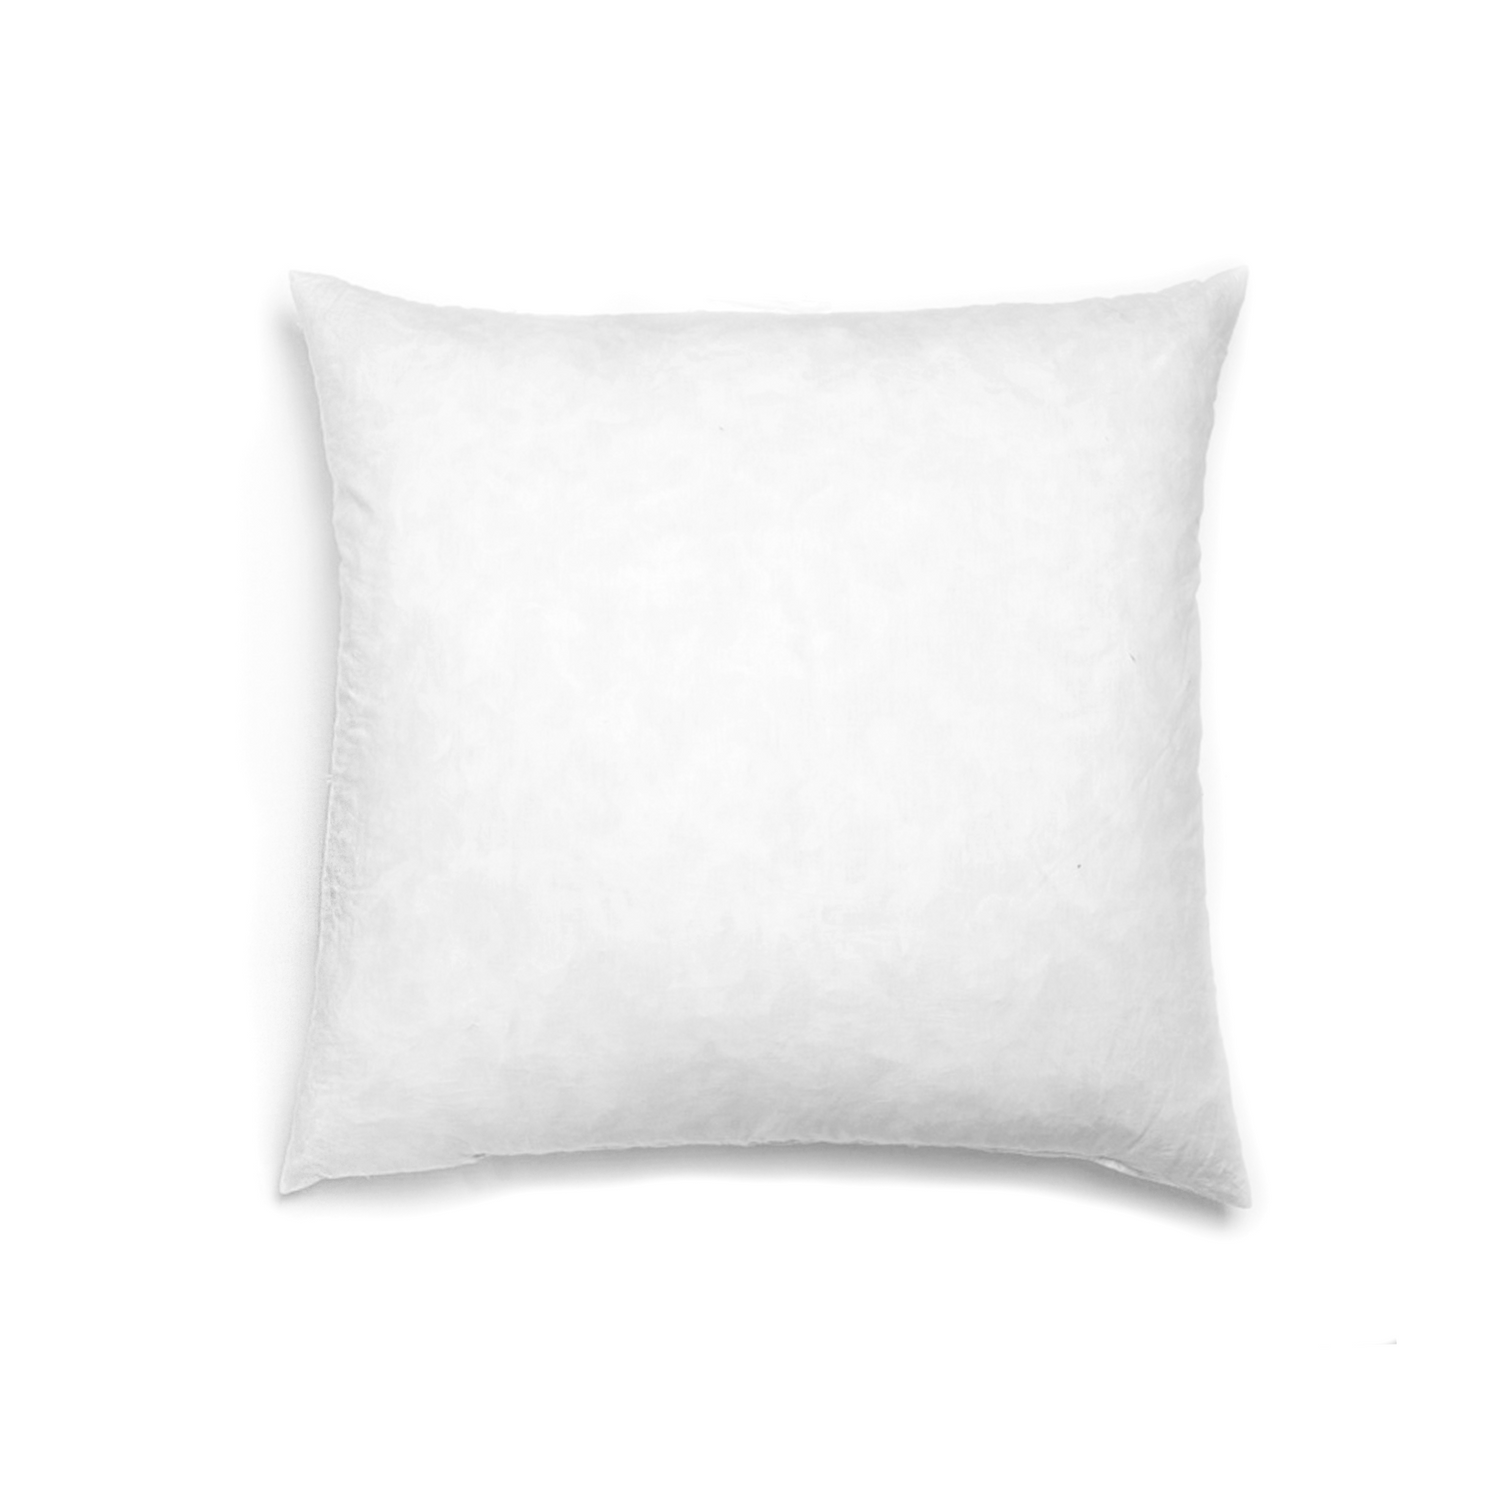 Pillow Insert  16x16 Inch Pillow Form - Digs N Gifts